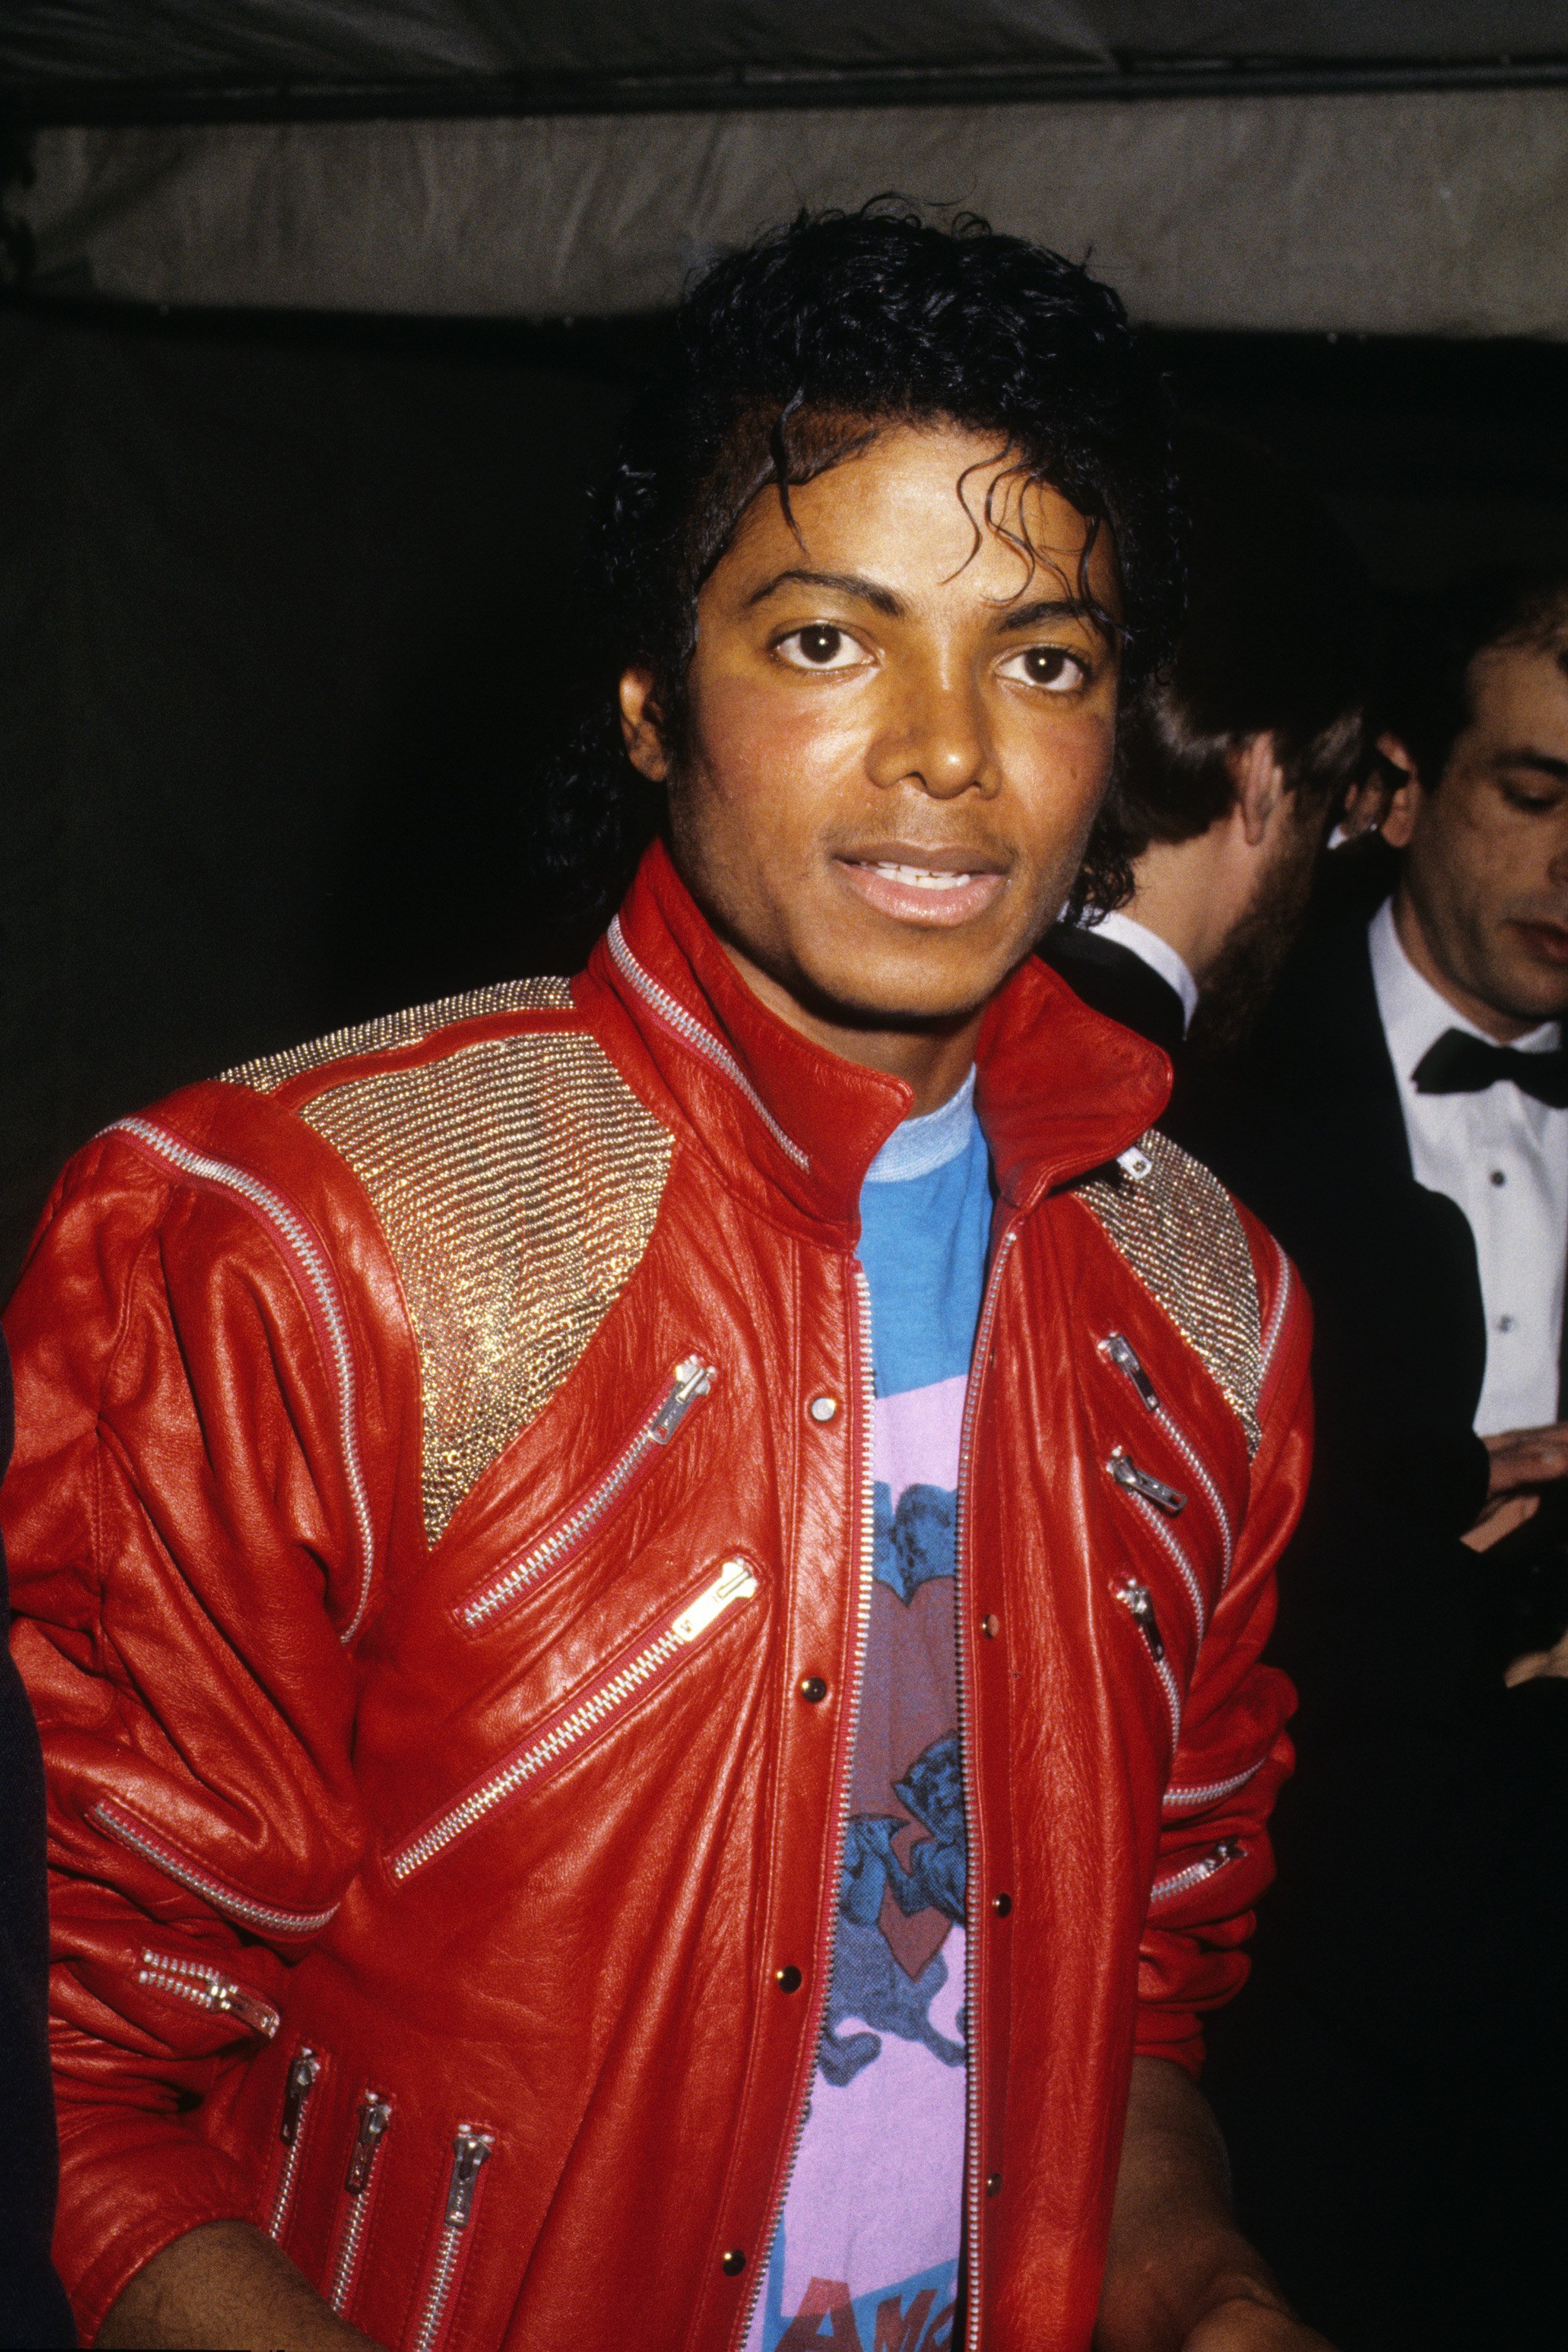 Musician Michael Jackson in Los Angeles circa 1990. | Source: Getty Images